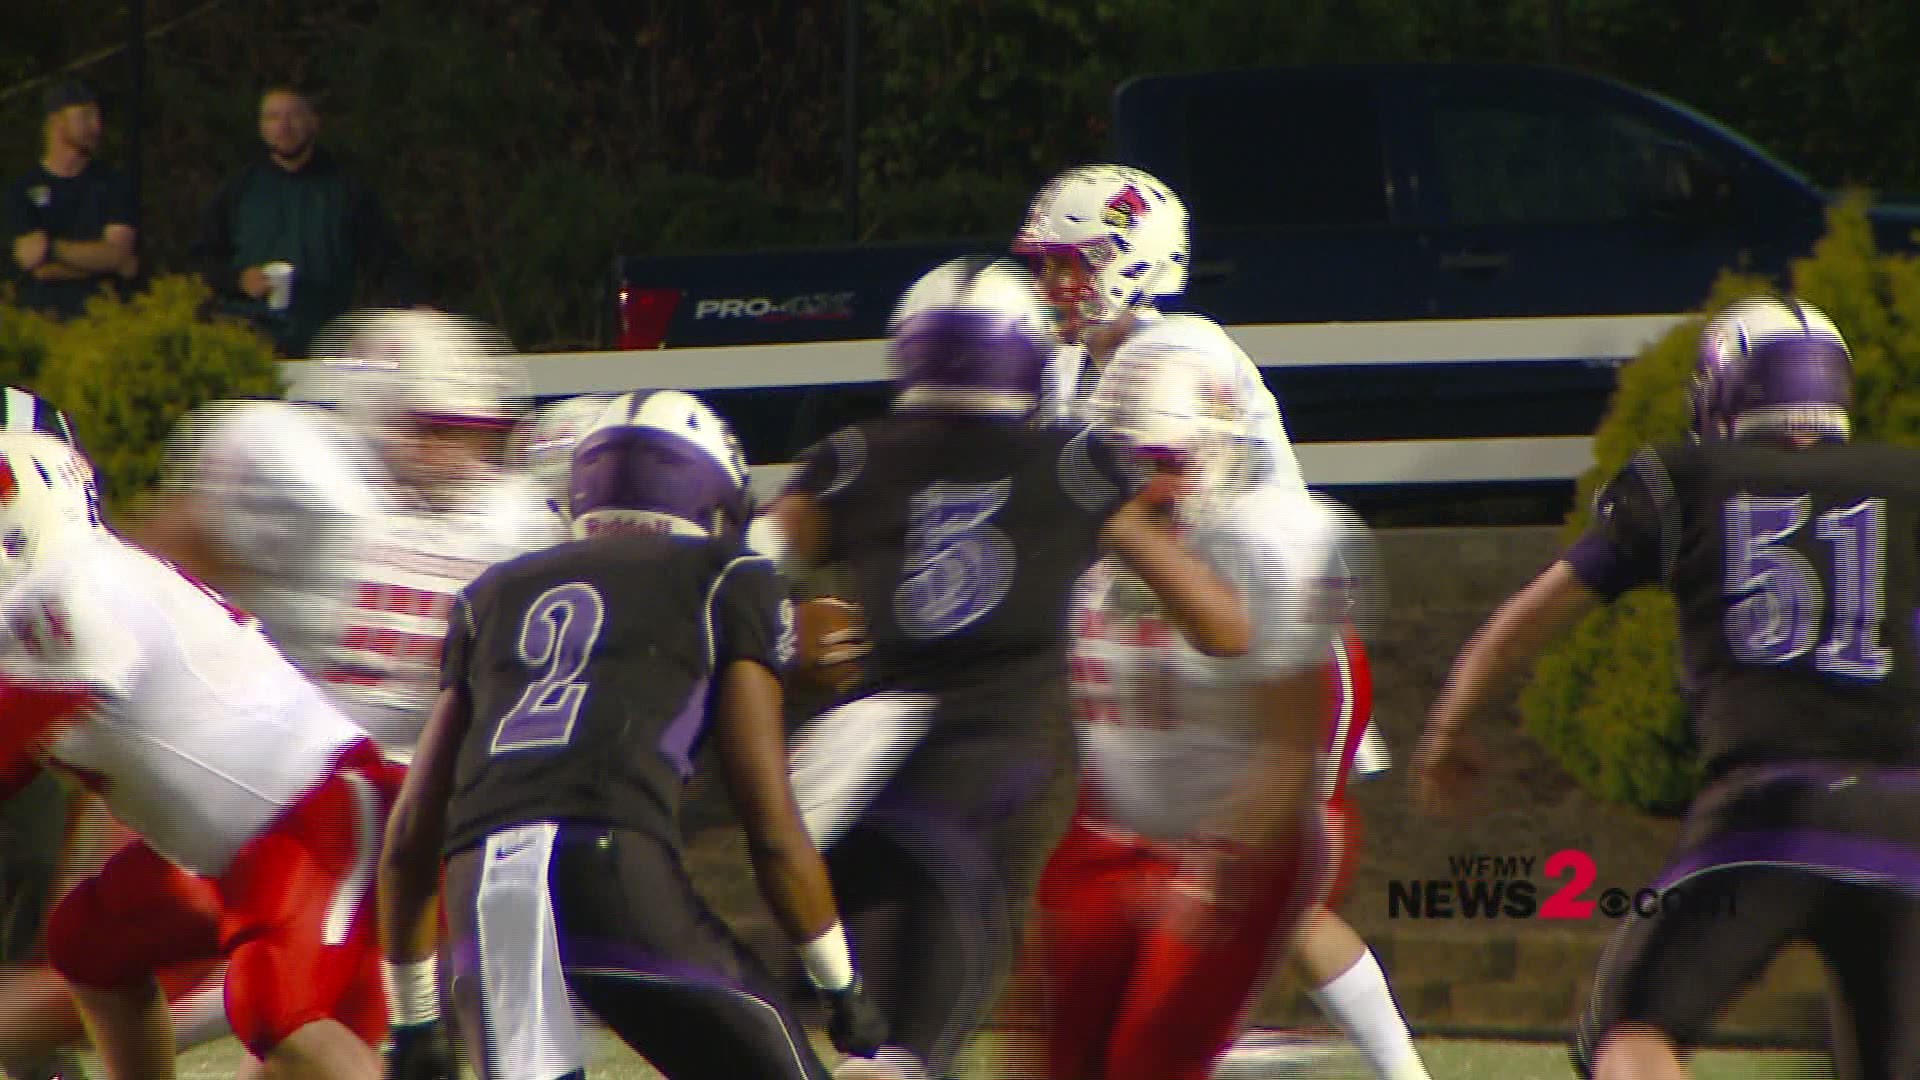 The Cardinals Are 5-0 On The Season Heading Into Next Week's Game At Reidsville